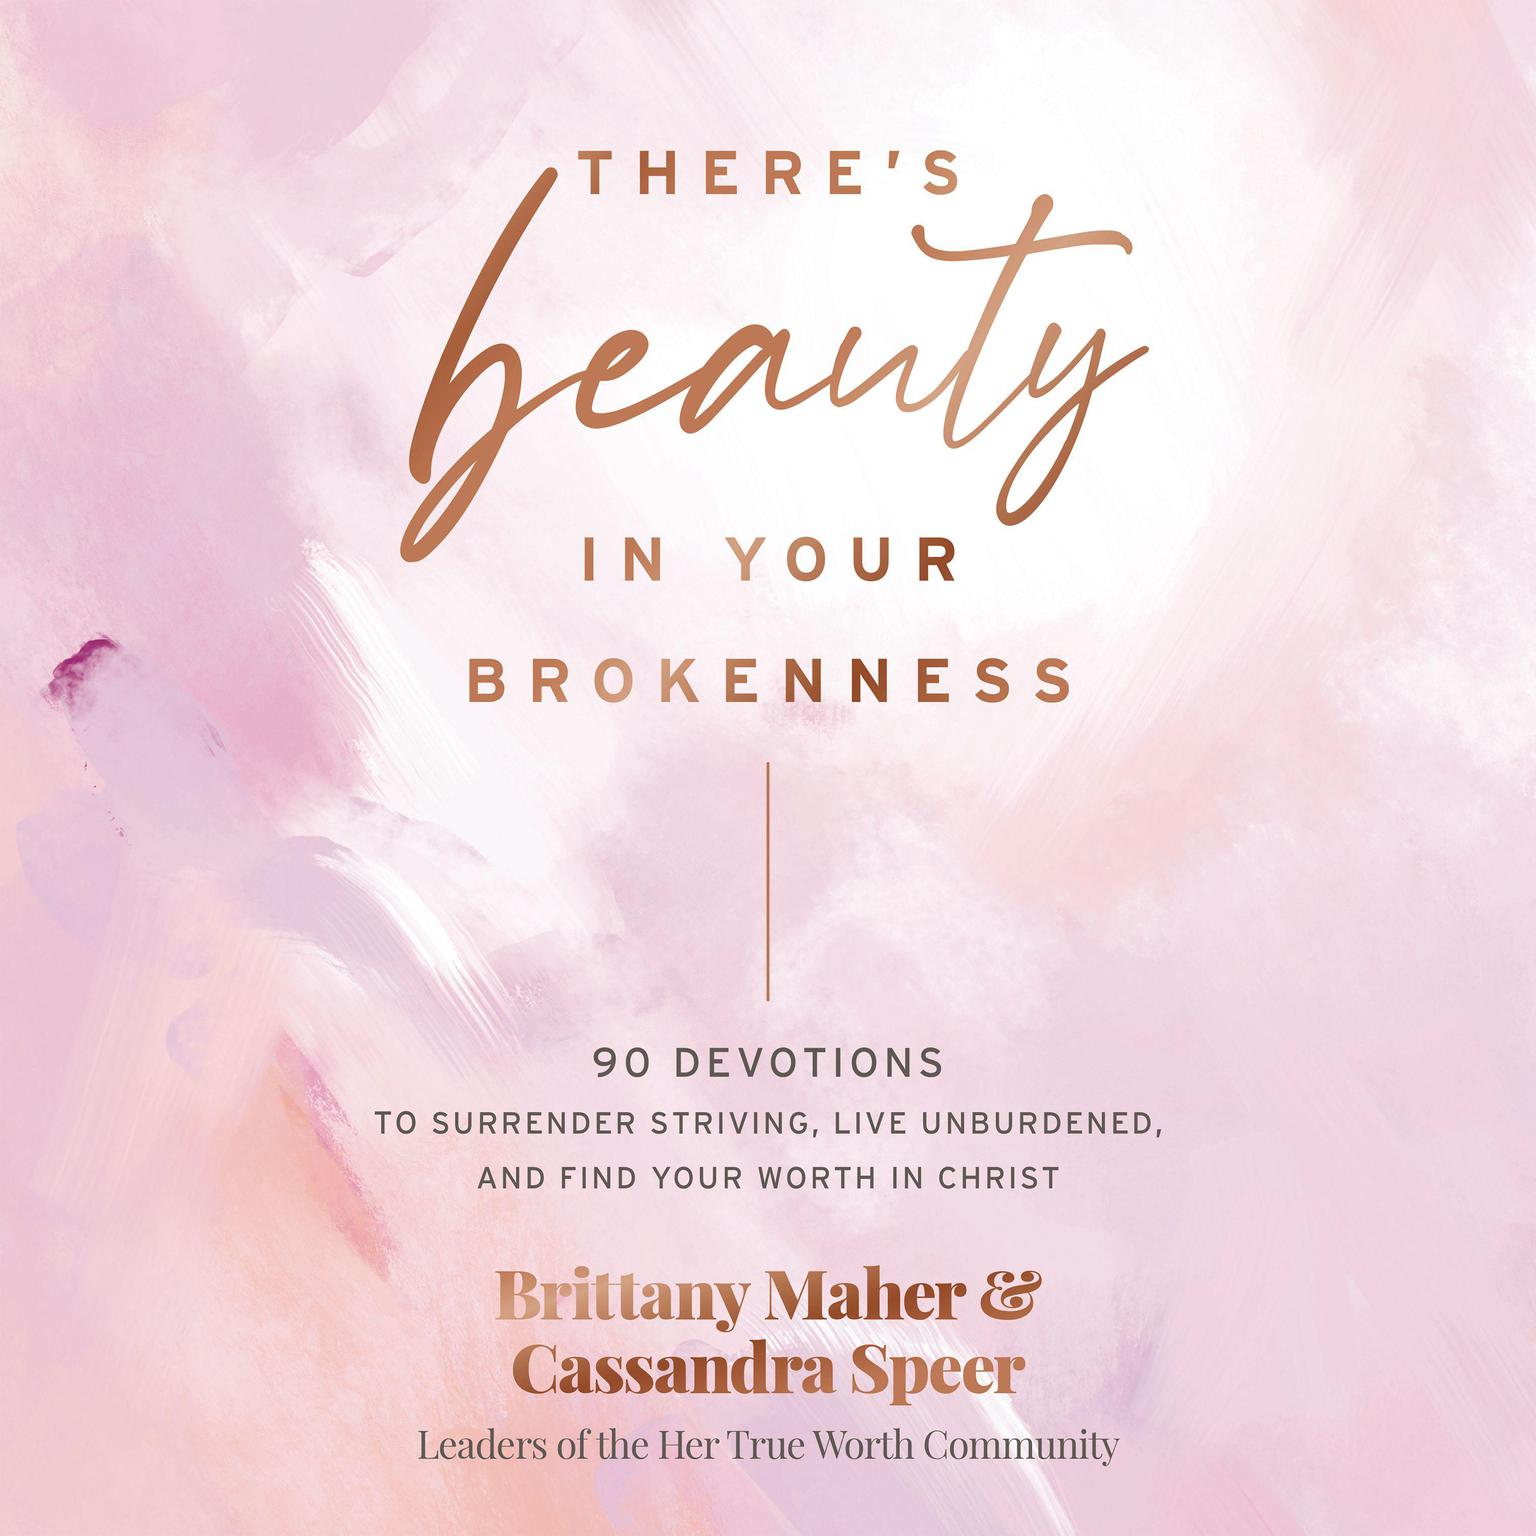 Theres Beauty in Your Brokenness: 90 Devotions to Surrender Striving, Live Unburdened, and Find Your Worth in Christ Audiobook, by Brittany Maher